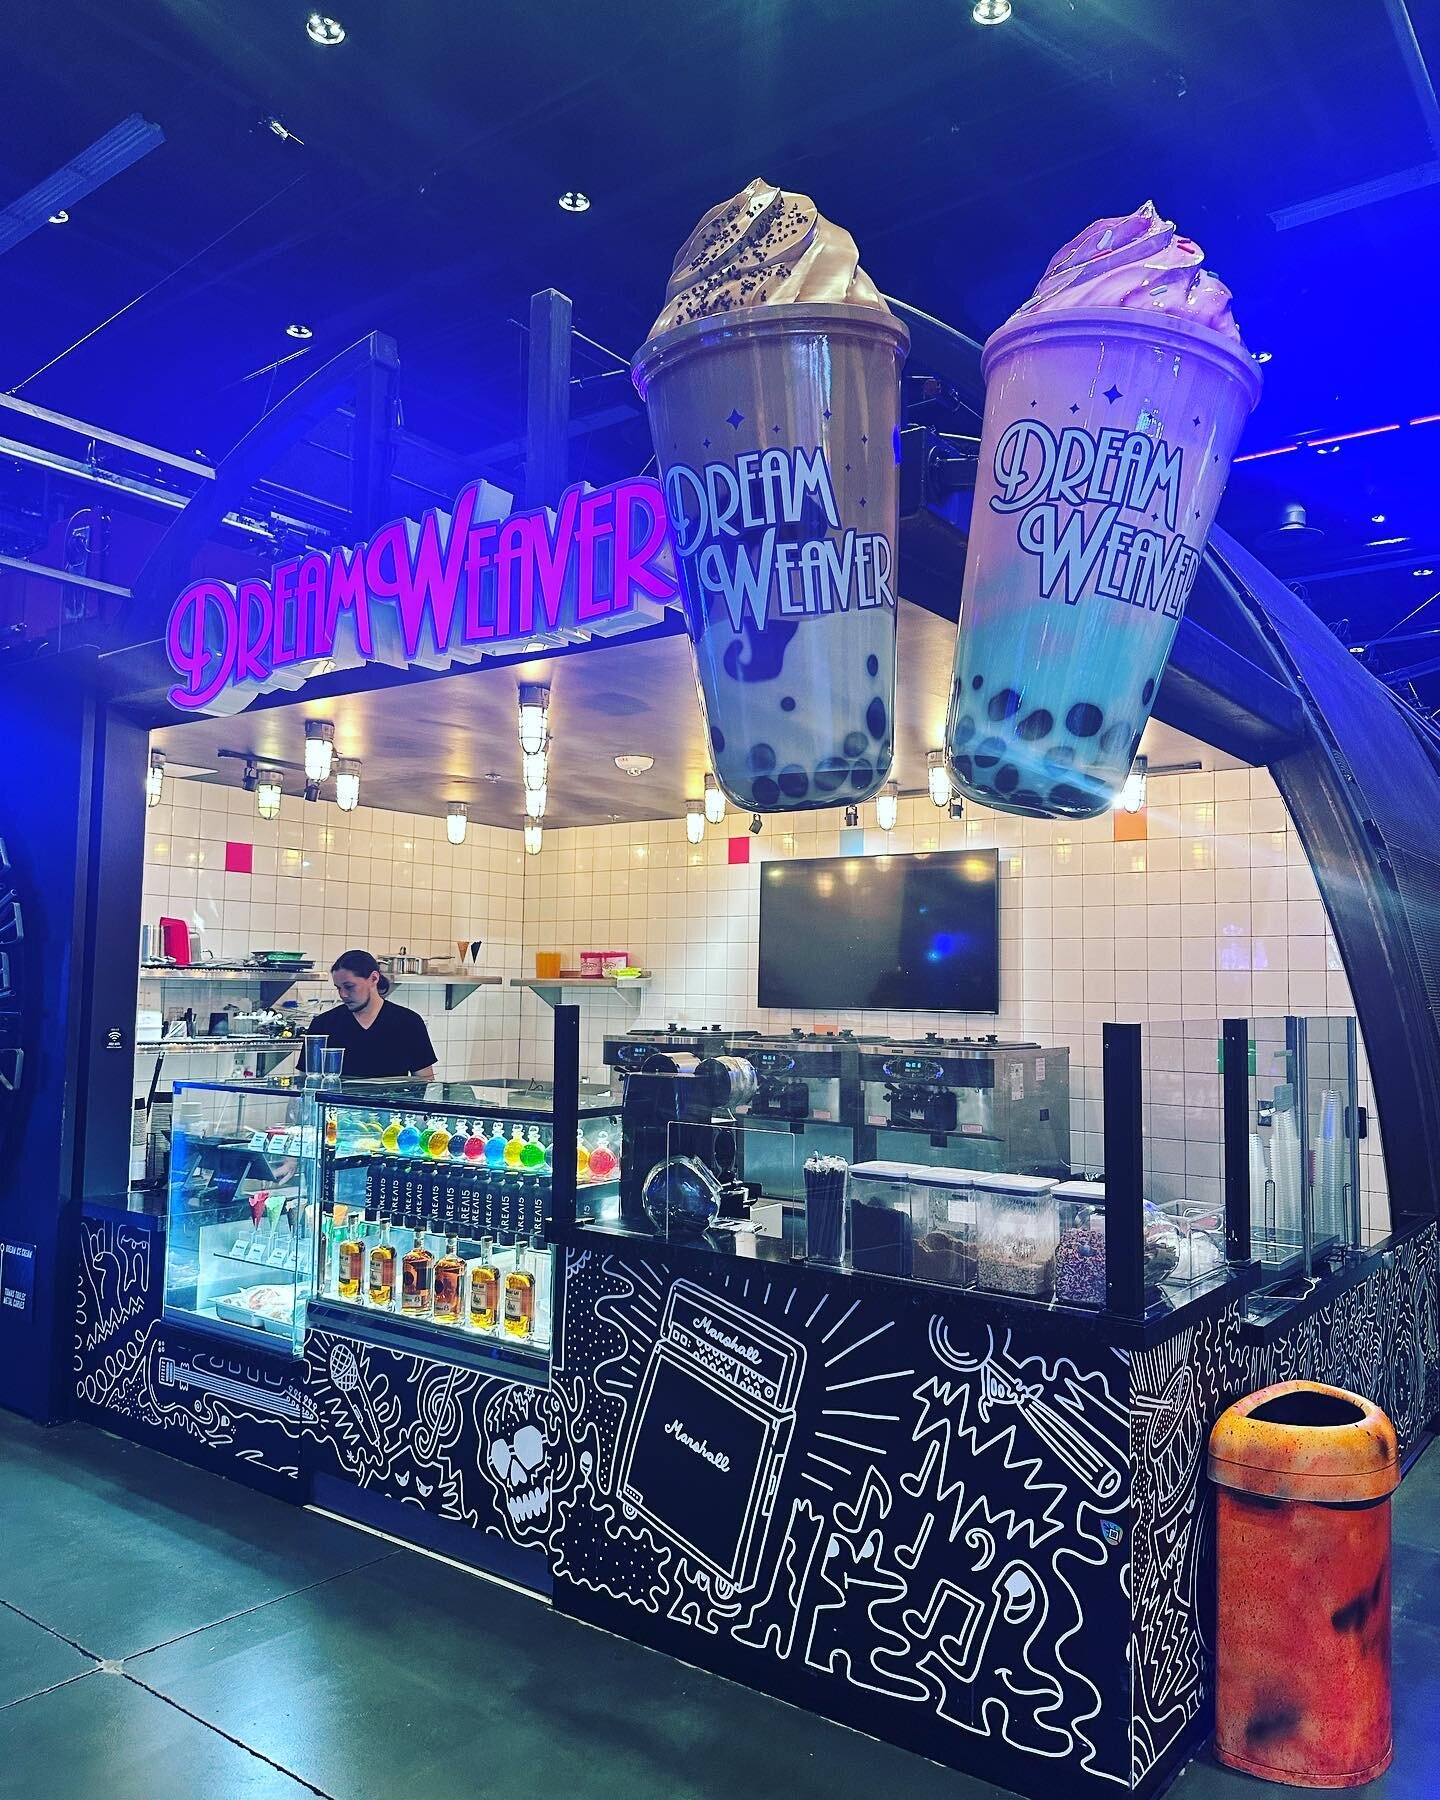 Check out our new Boba display @area15official #dreamweaver